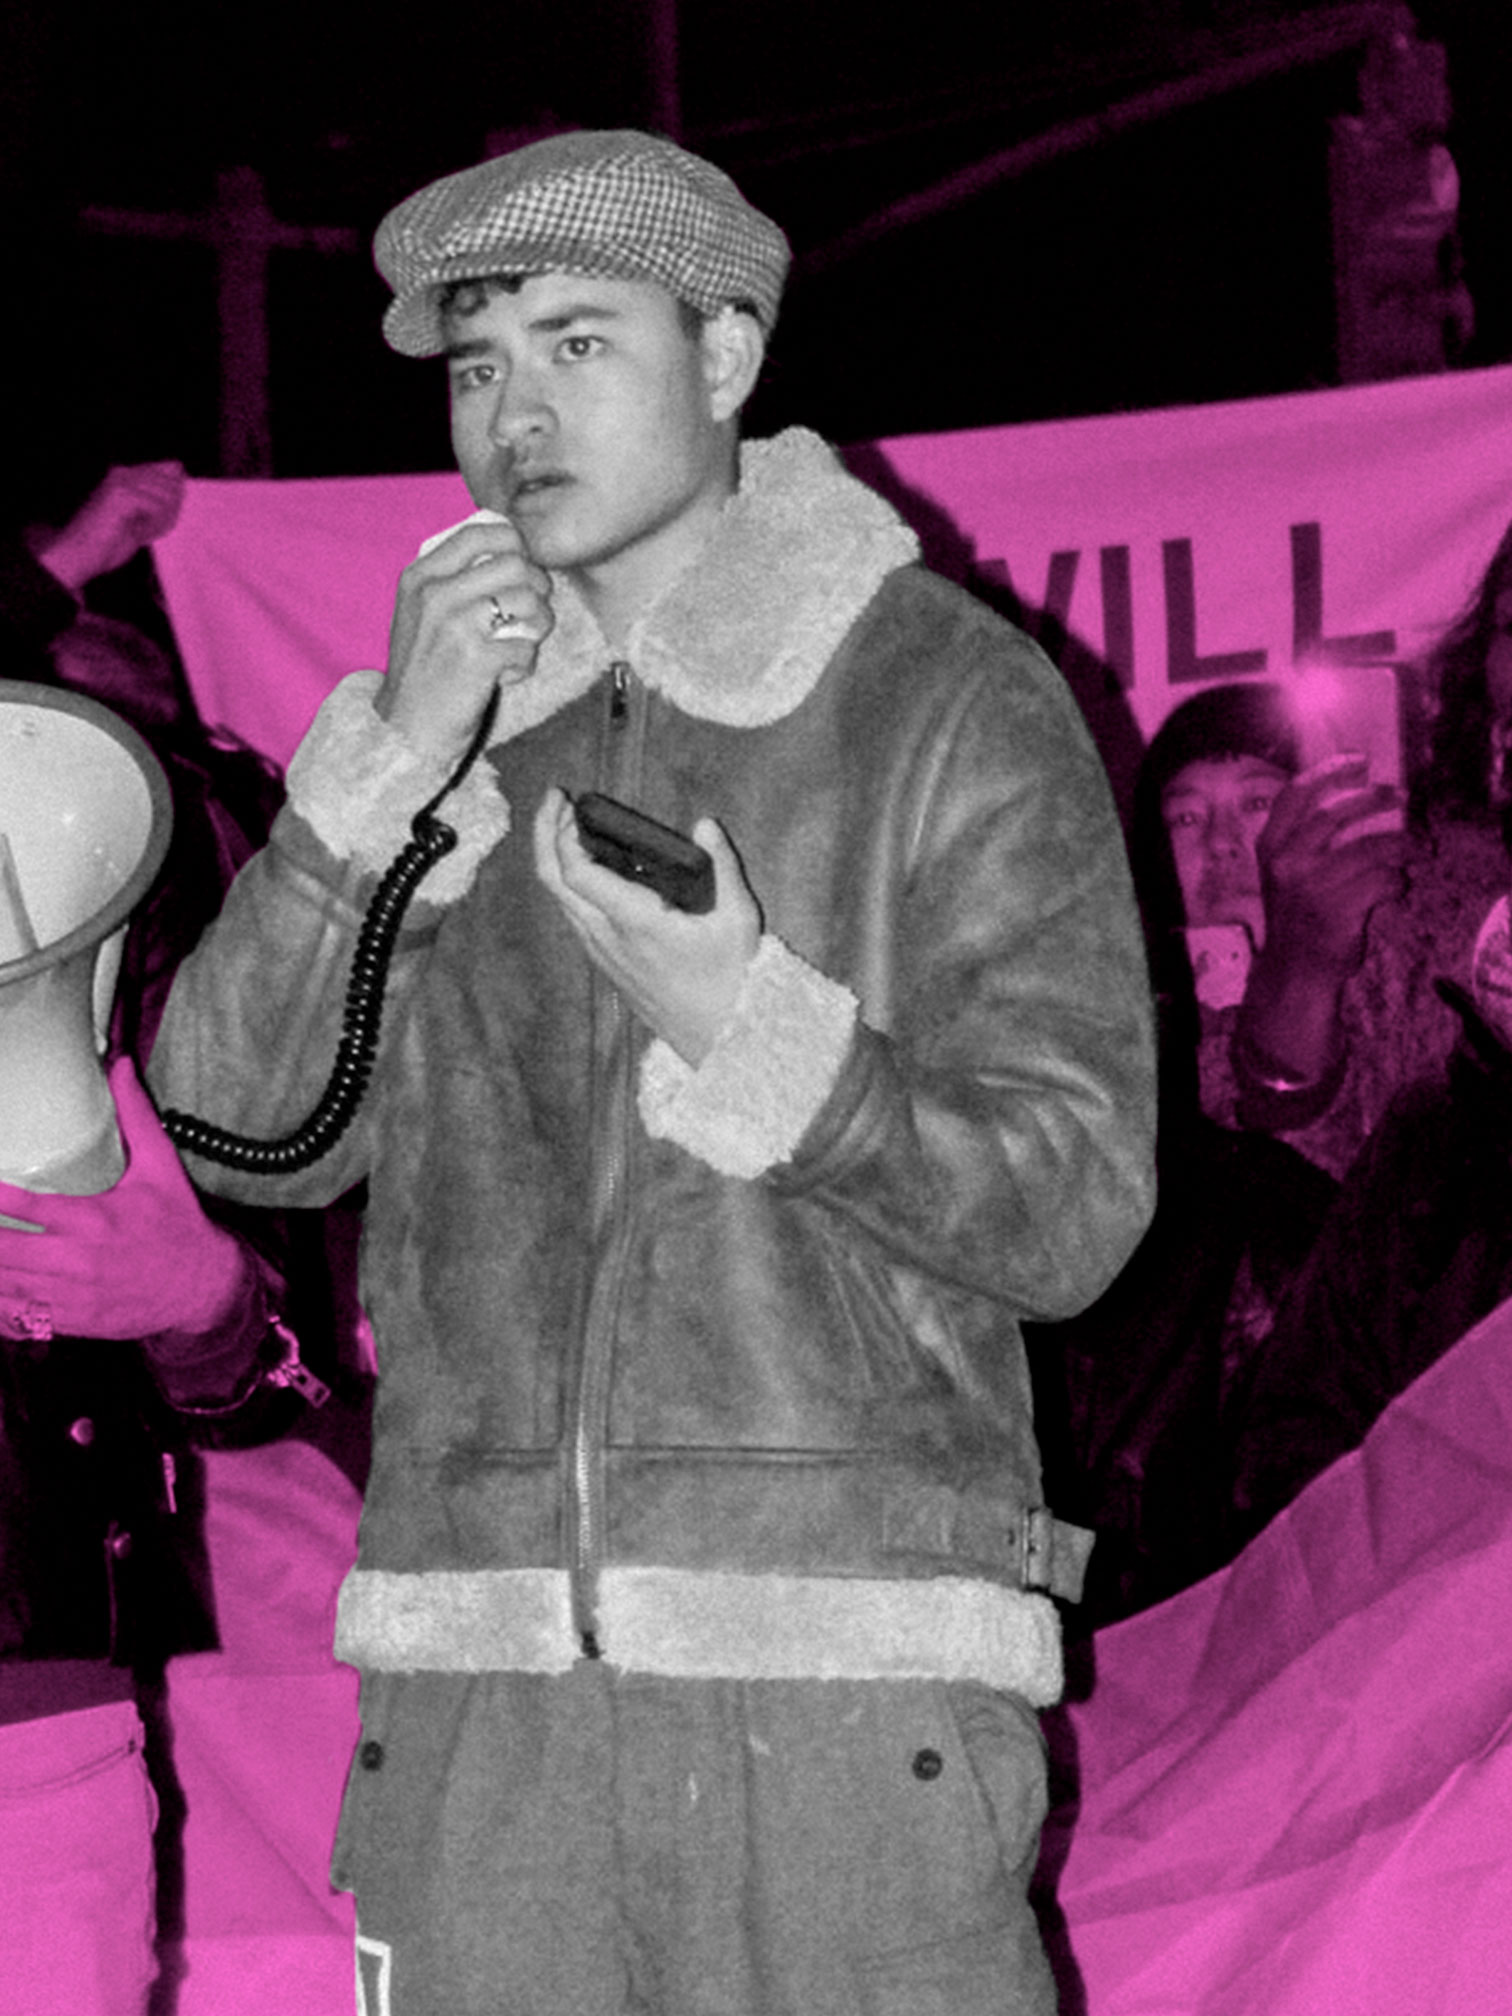 Chella Man speaks on stage at a protest. He wears a moto jacket, hat, and pants, and holds the mic to a megaphone, looking out at the crowd. The image is filtered in neon pink, while Chella Man remains filtered in black and white.